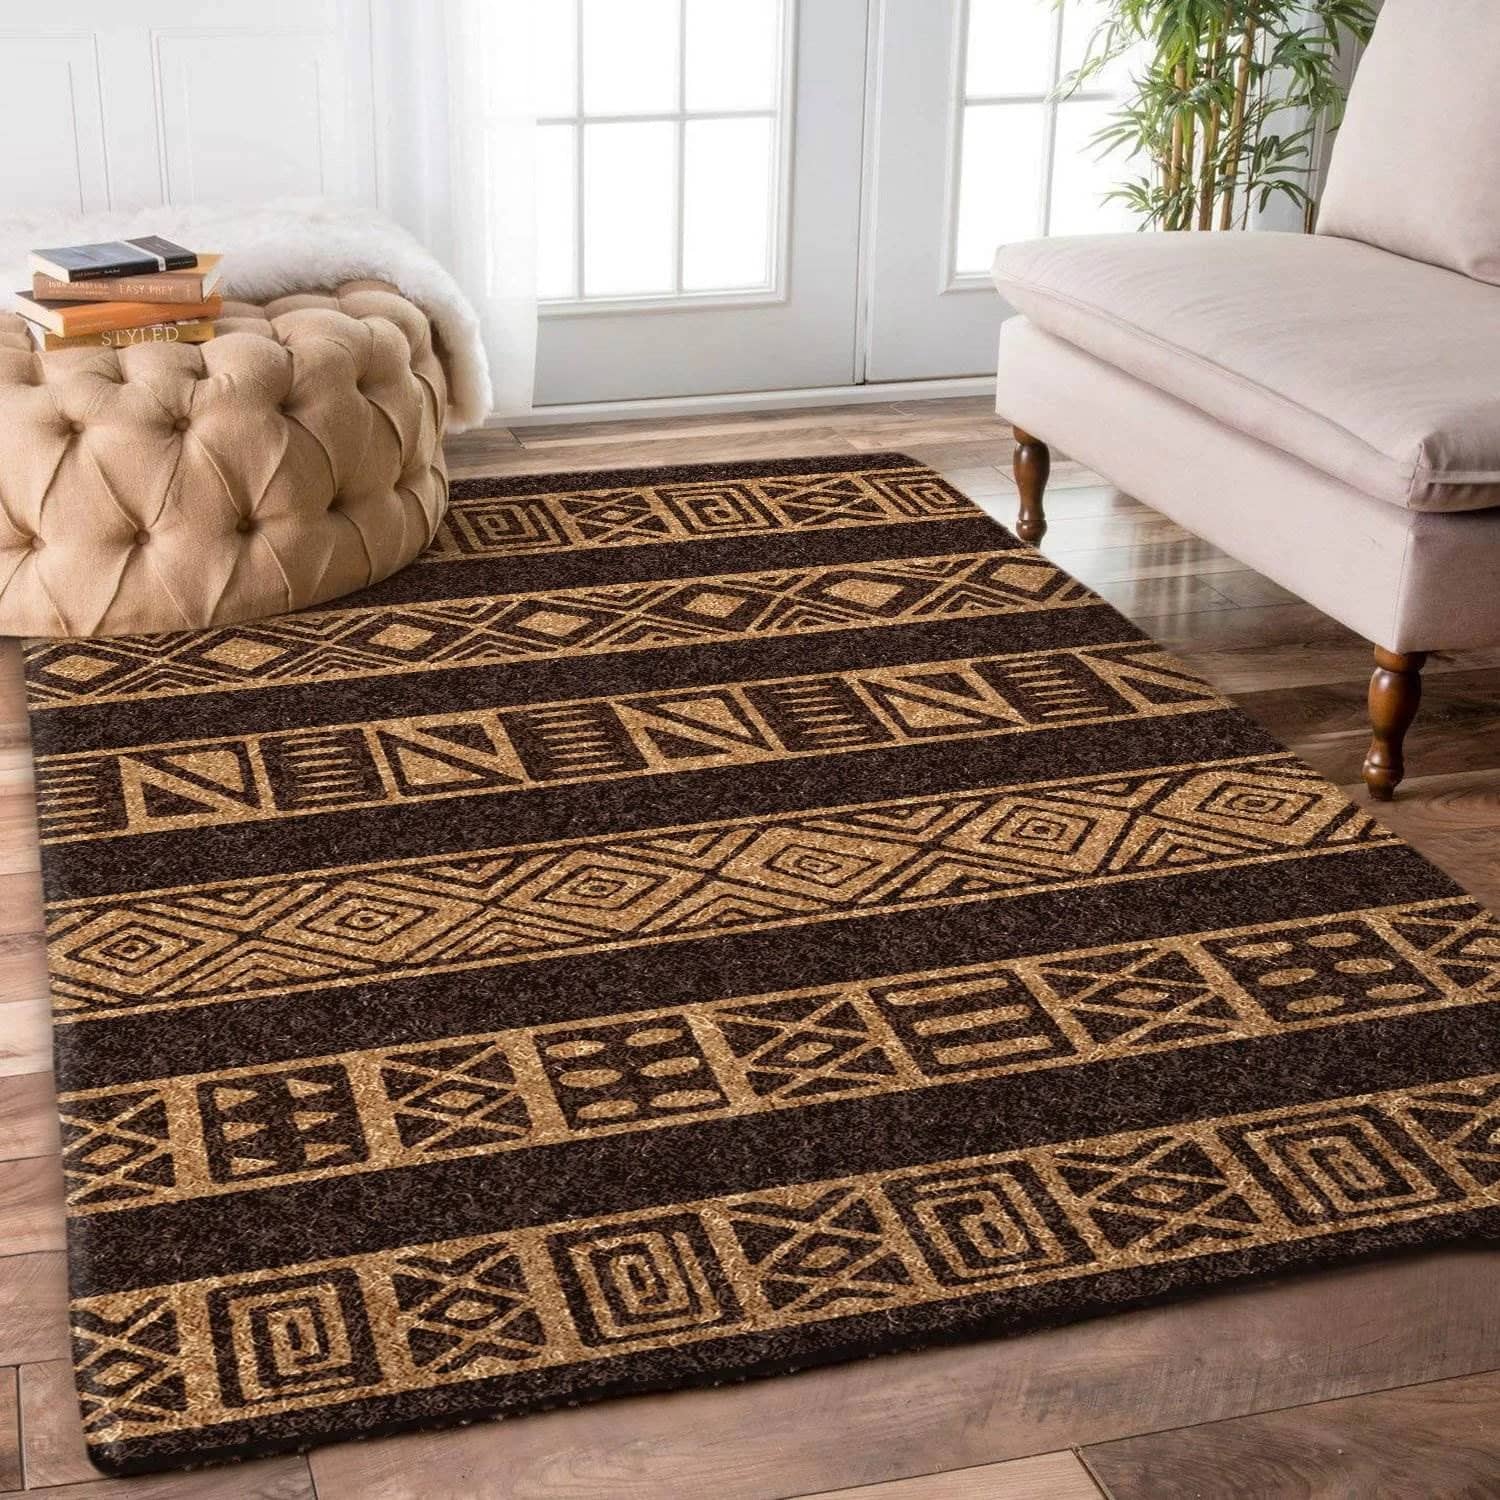 African Limited Edition Amazon Best Seller Sku 262584 Rug